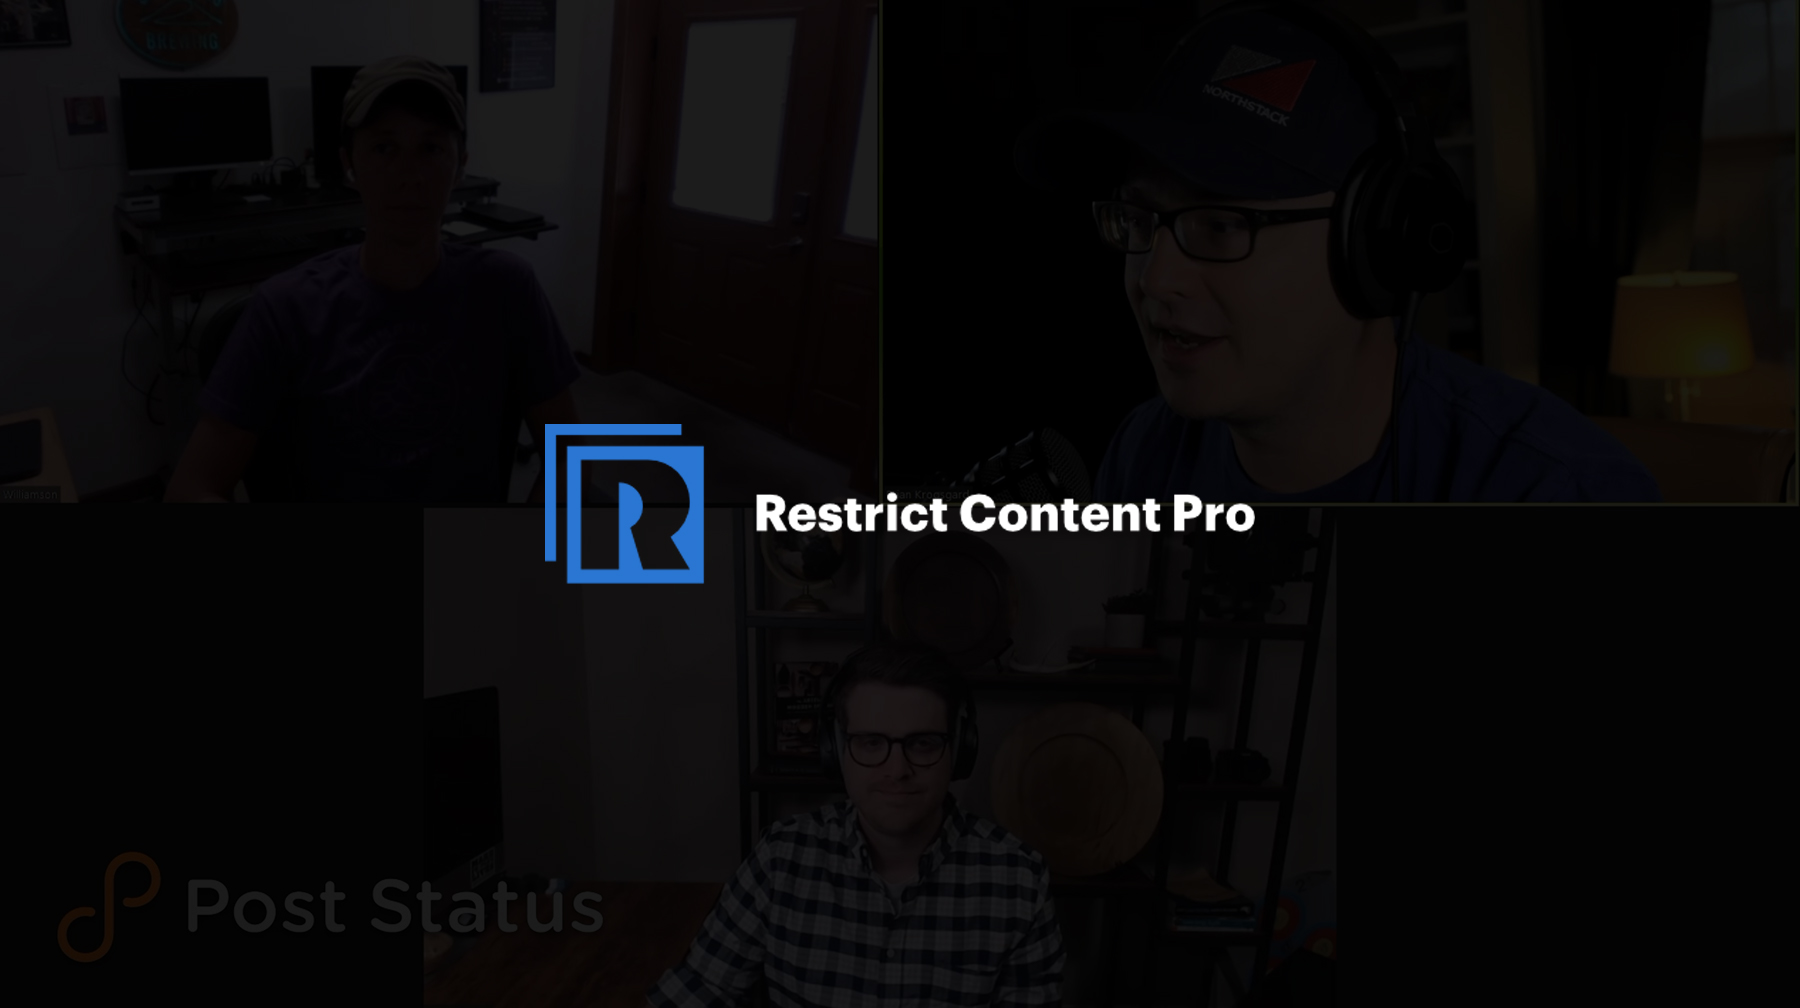 iThemes has acquired Restrict Content Pro from Sandhills Development